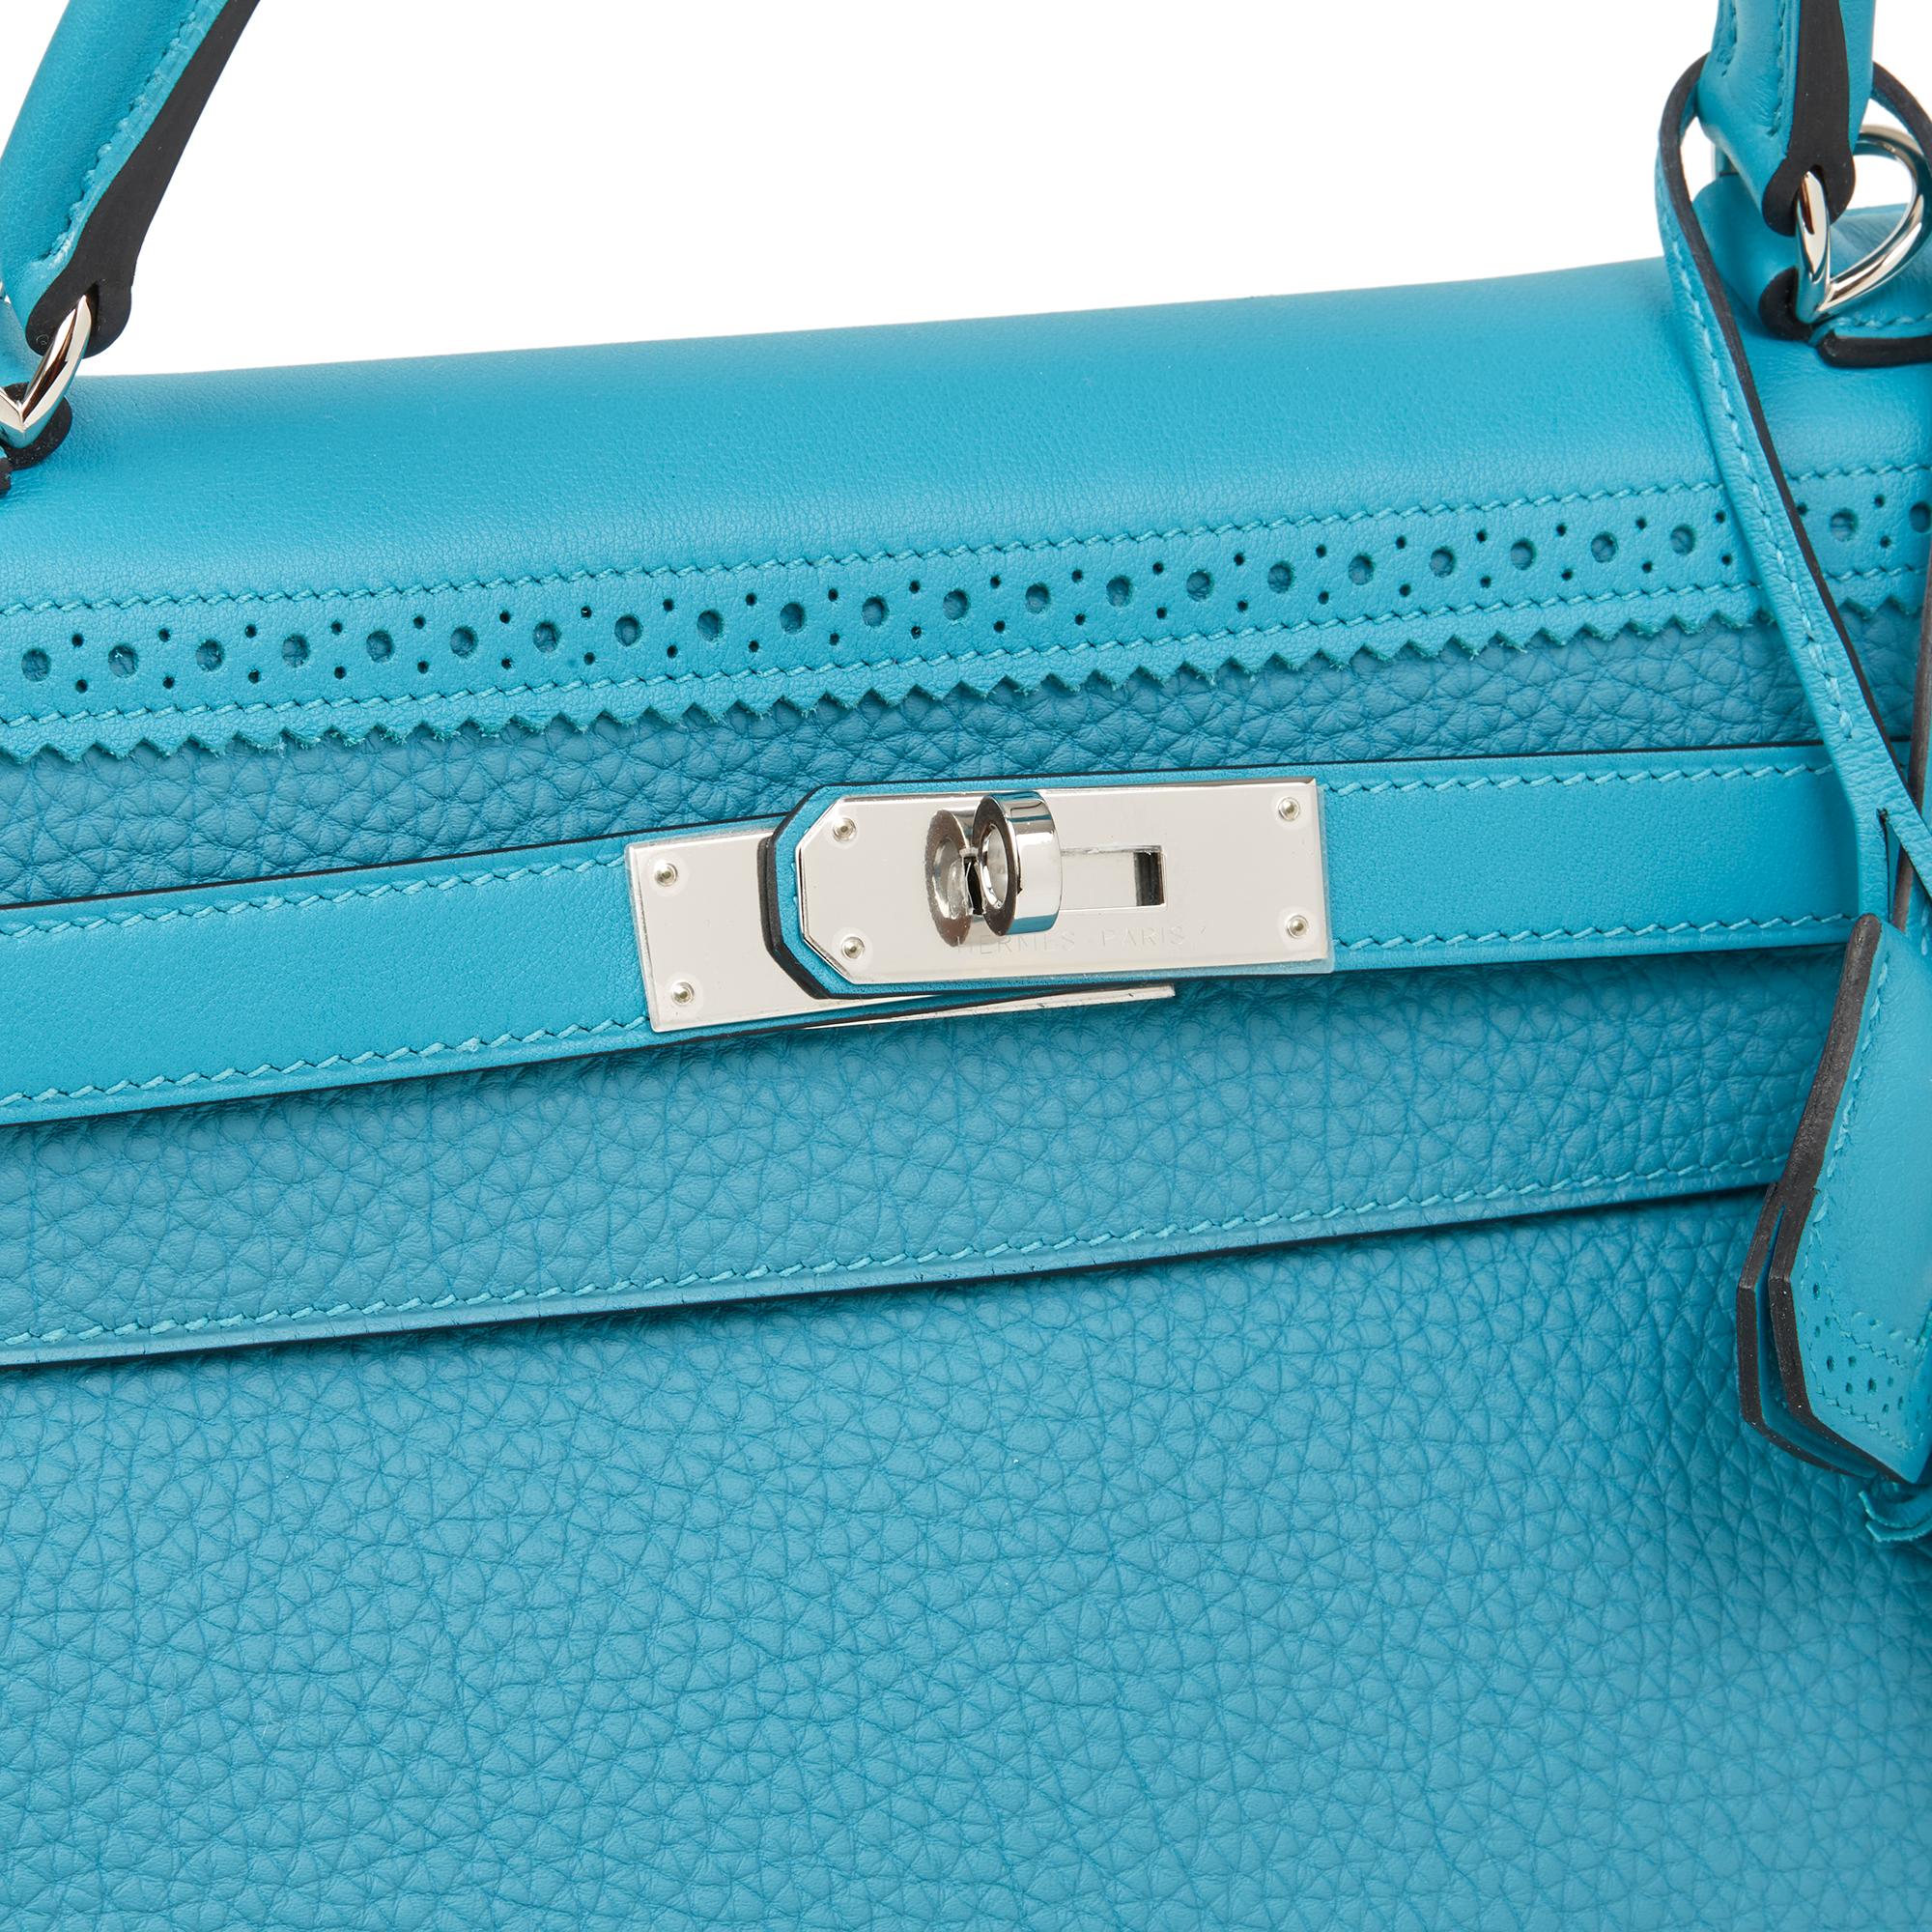 Women's 2014 Hermes Turquoise Togo & Swift Leather Ghillies Kelly 35cm Retourne